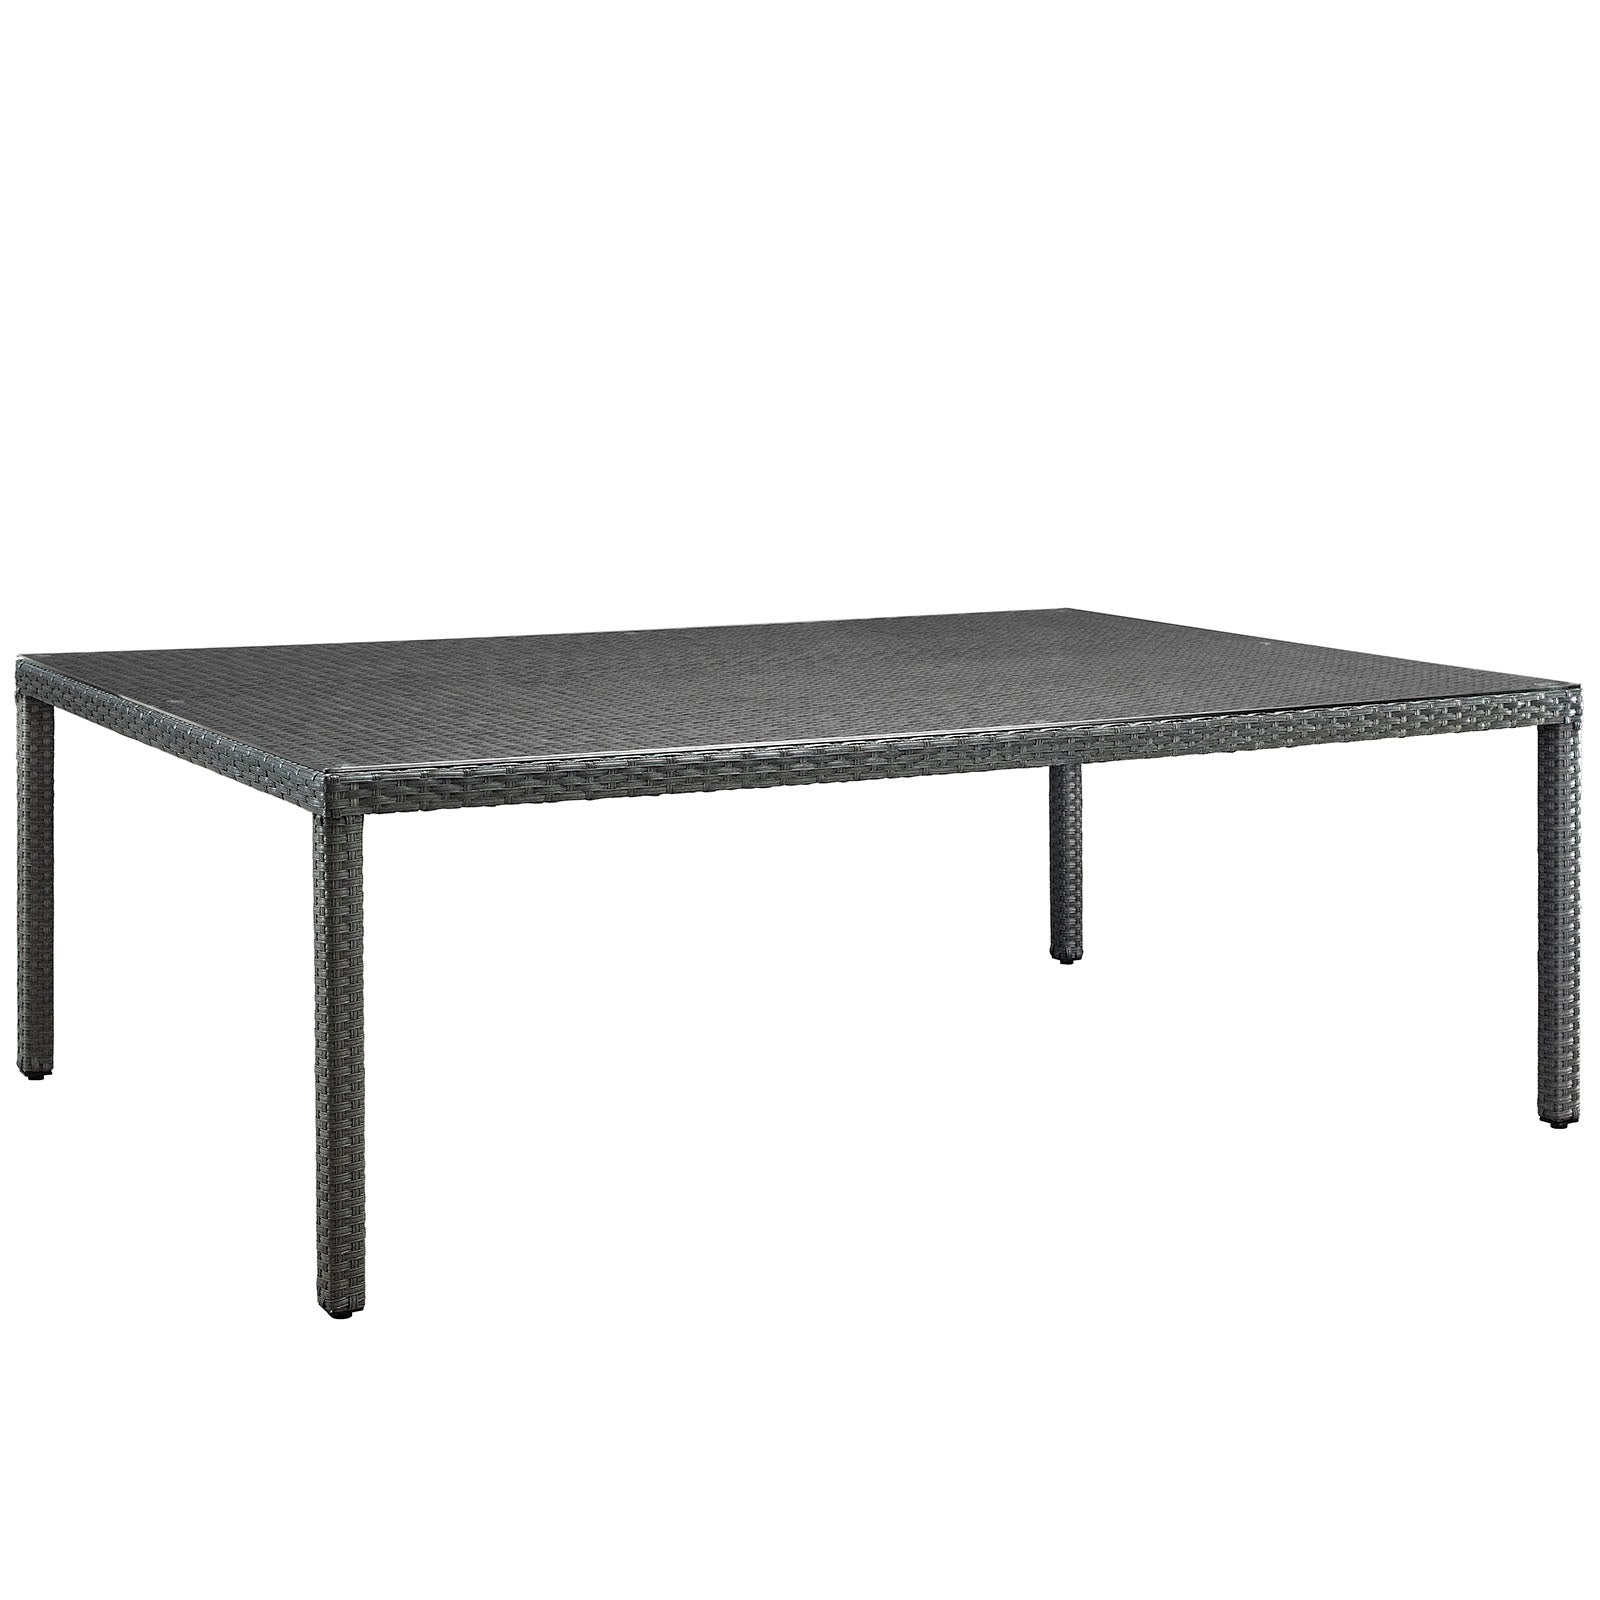 Sojourn 90" Outdoor Patio Dining Table - East Shore Modern Home Furnishings